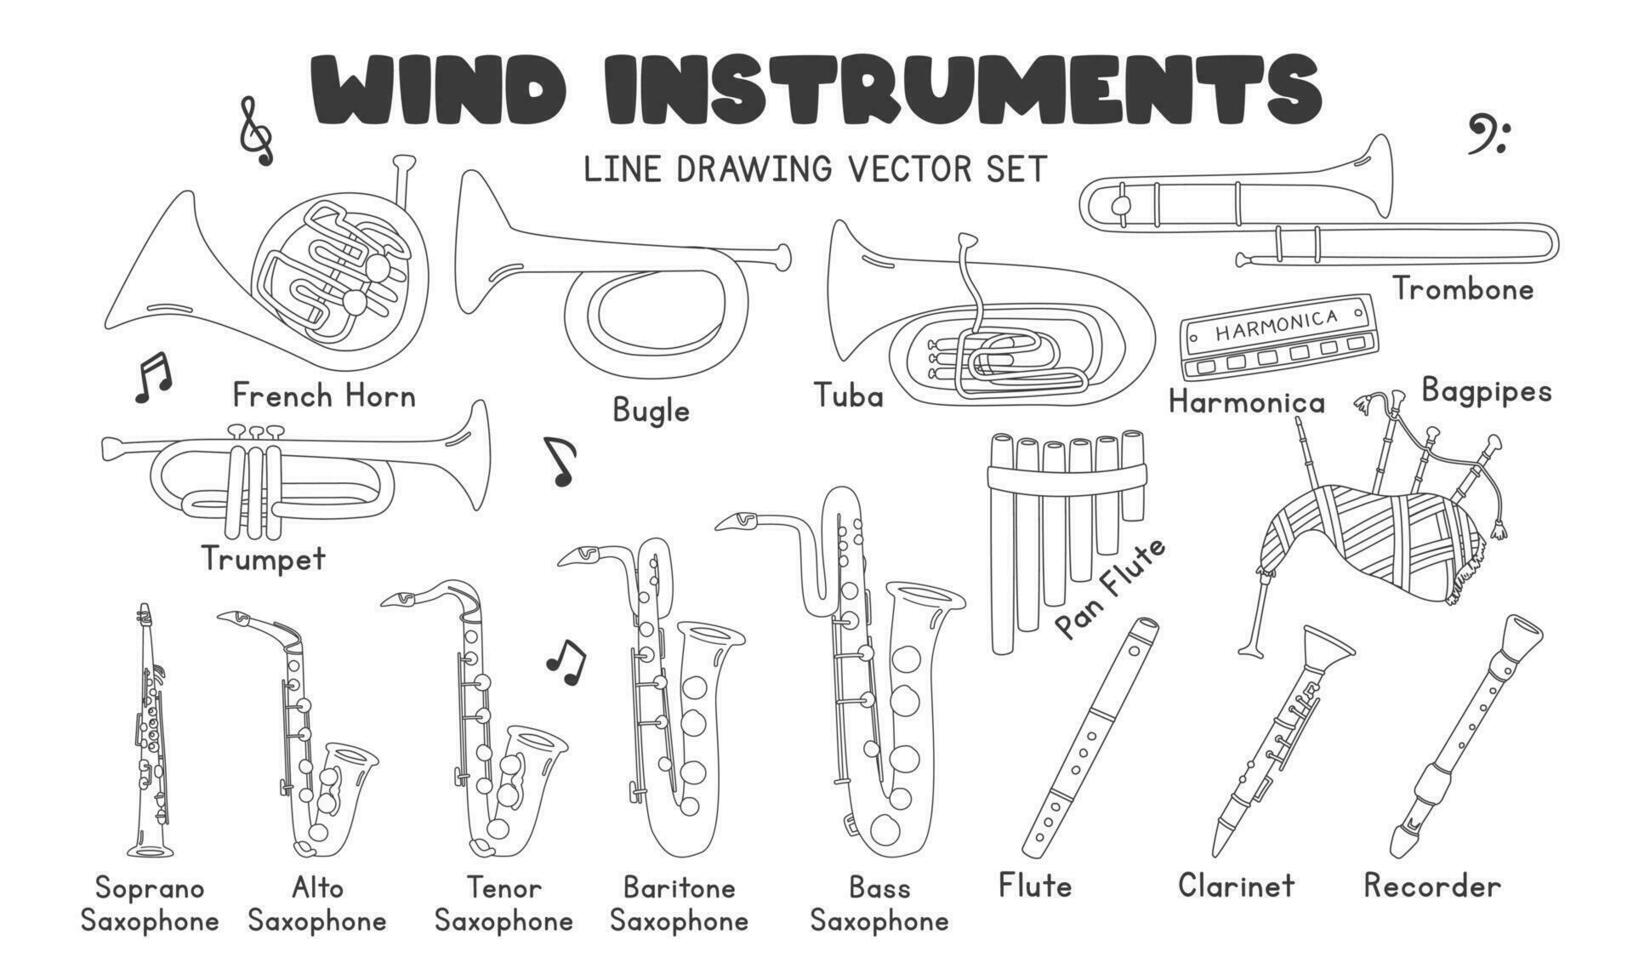 Musical wind instruments line drawing vector set. Trumpet, saxophone, pan flute, bagpipes clipart cartoon style, line art hand drawn style